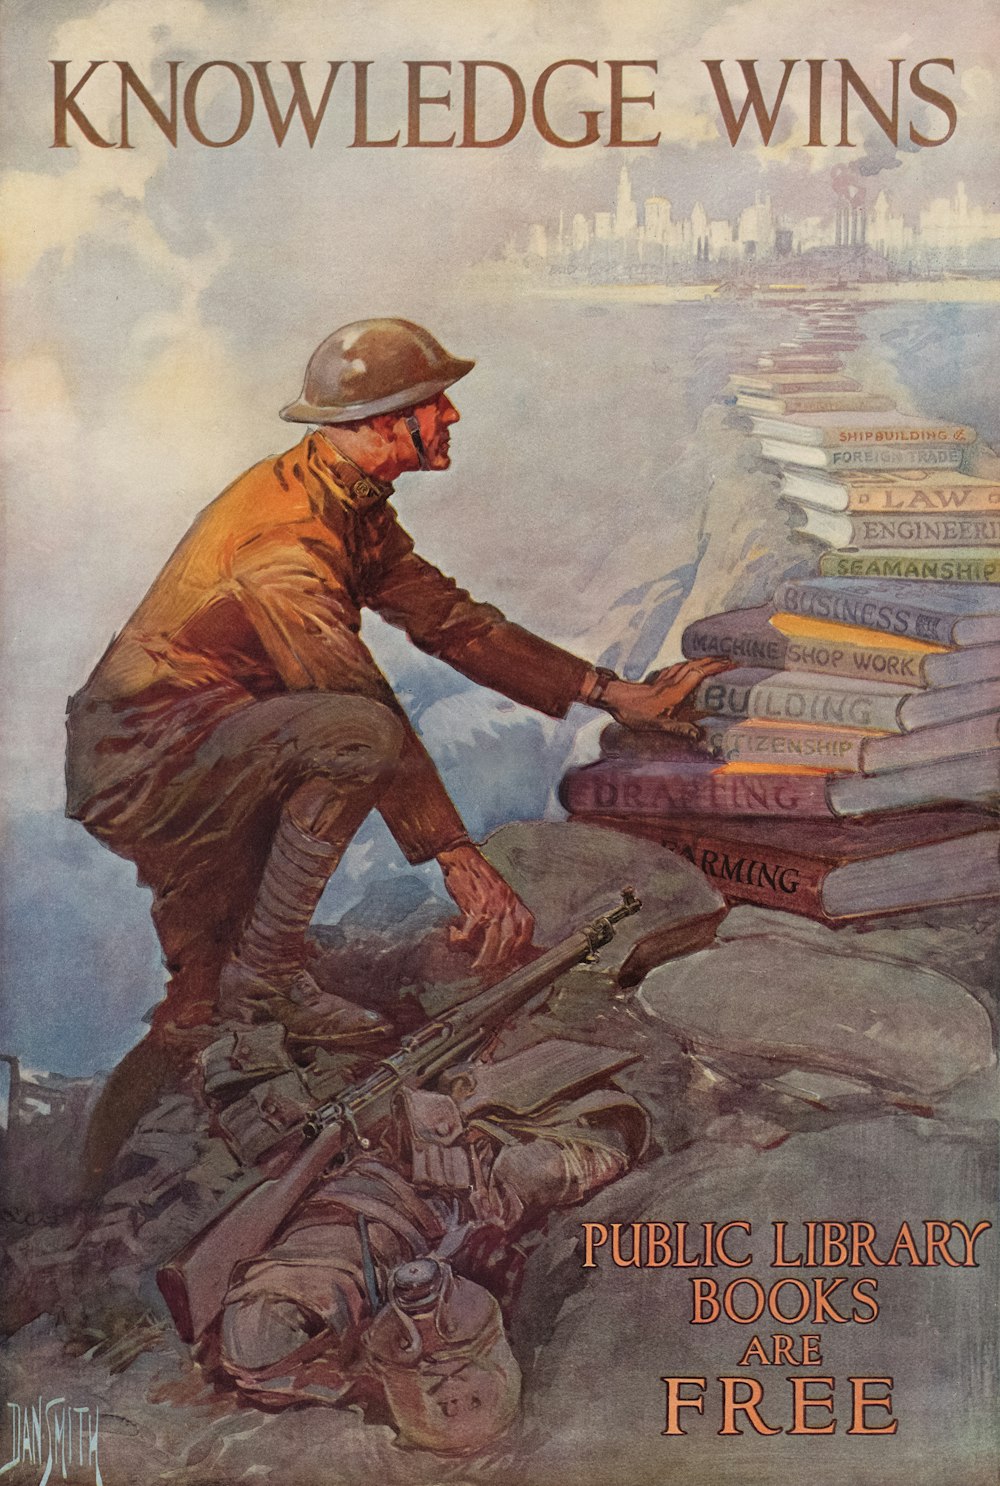 a book cover with a man putting books on top of a pile of books